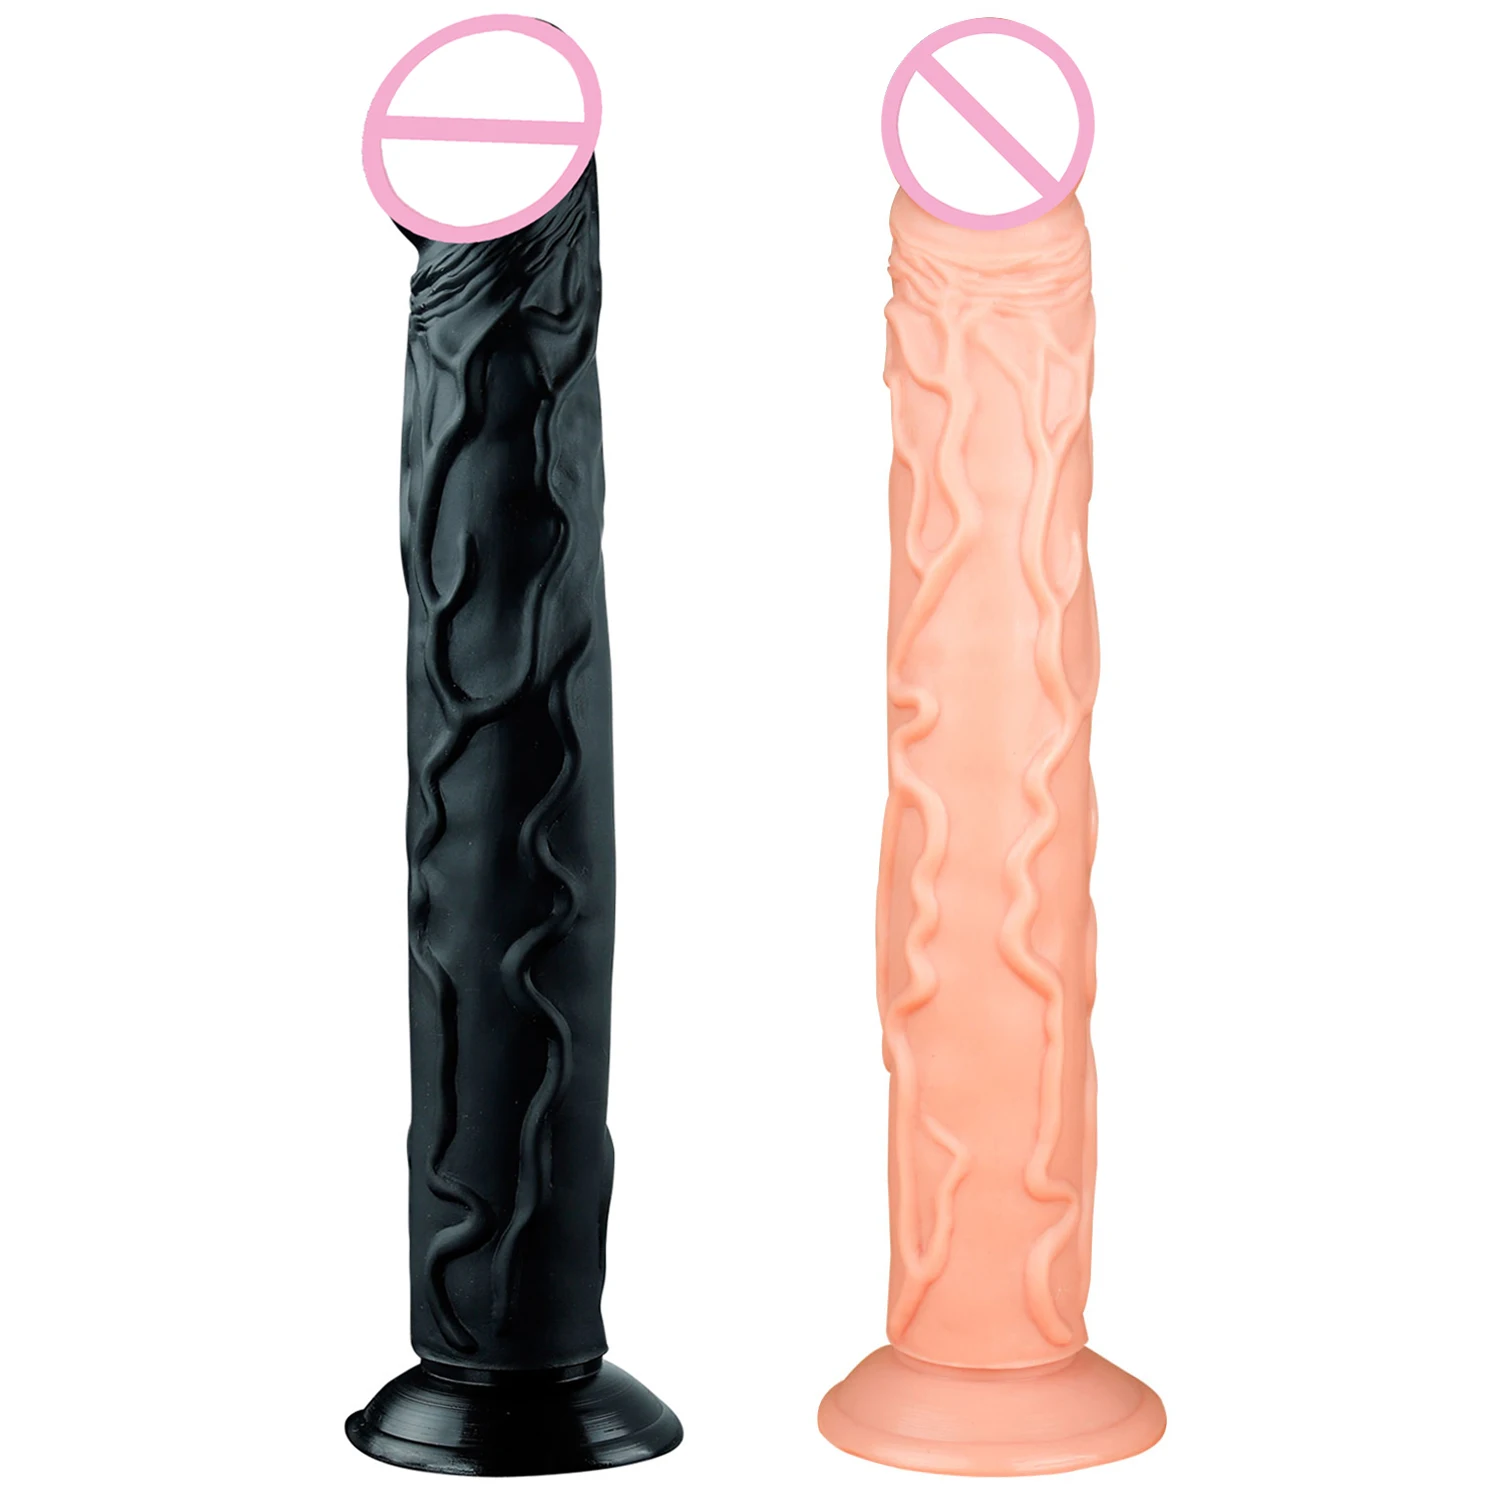 40cm Extra Large Realistic Dildo Dong Cock Penis Anal